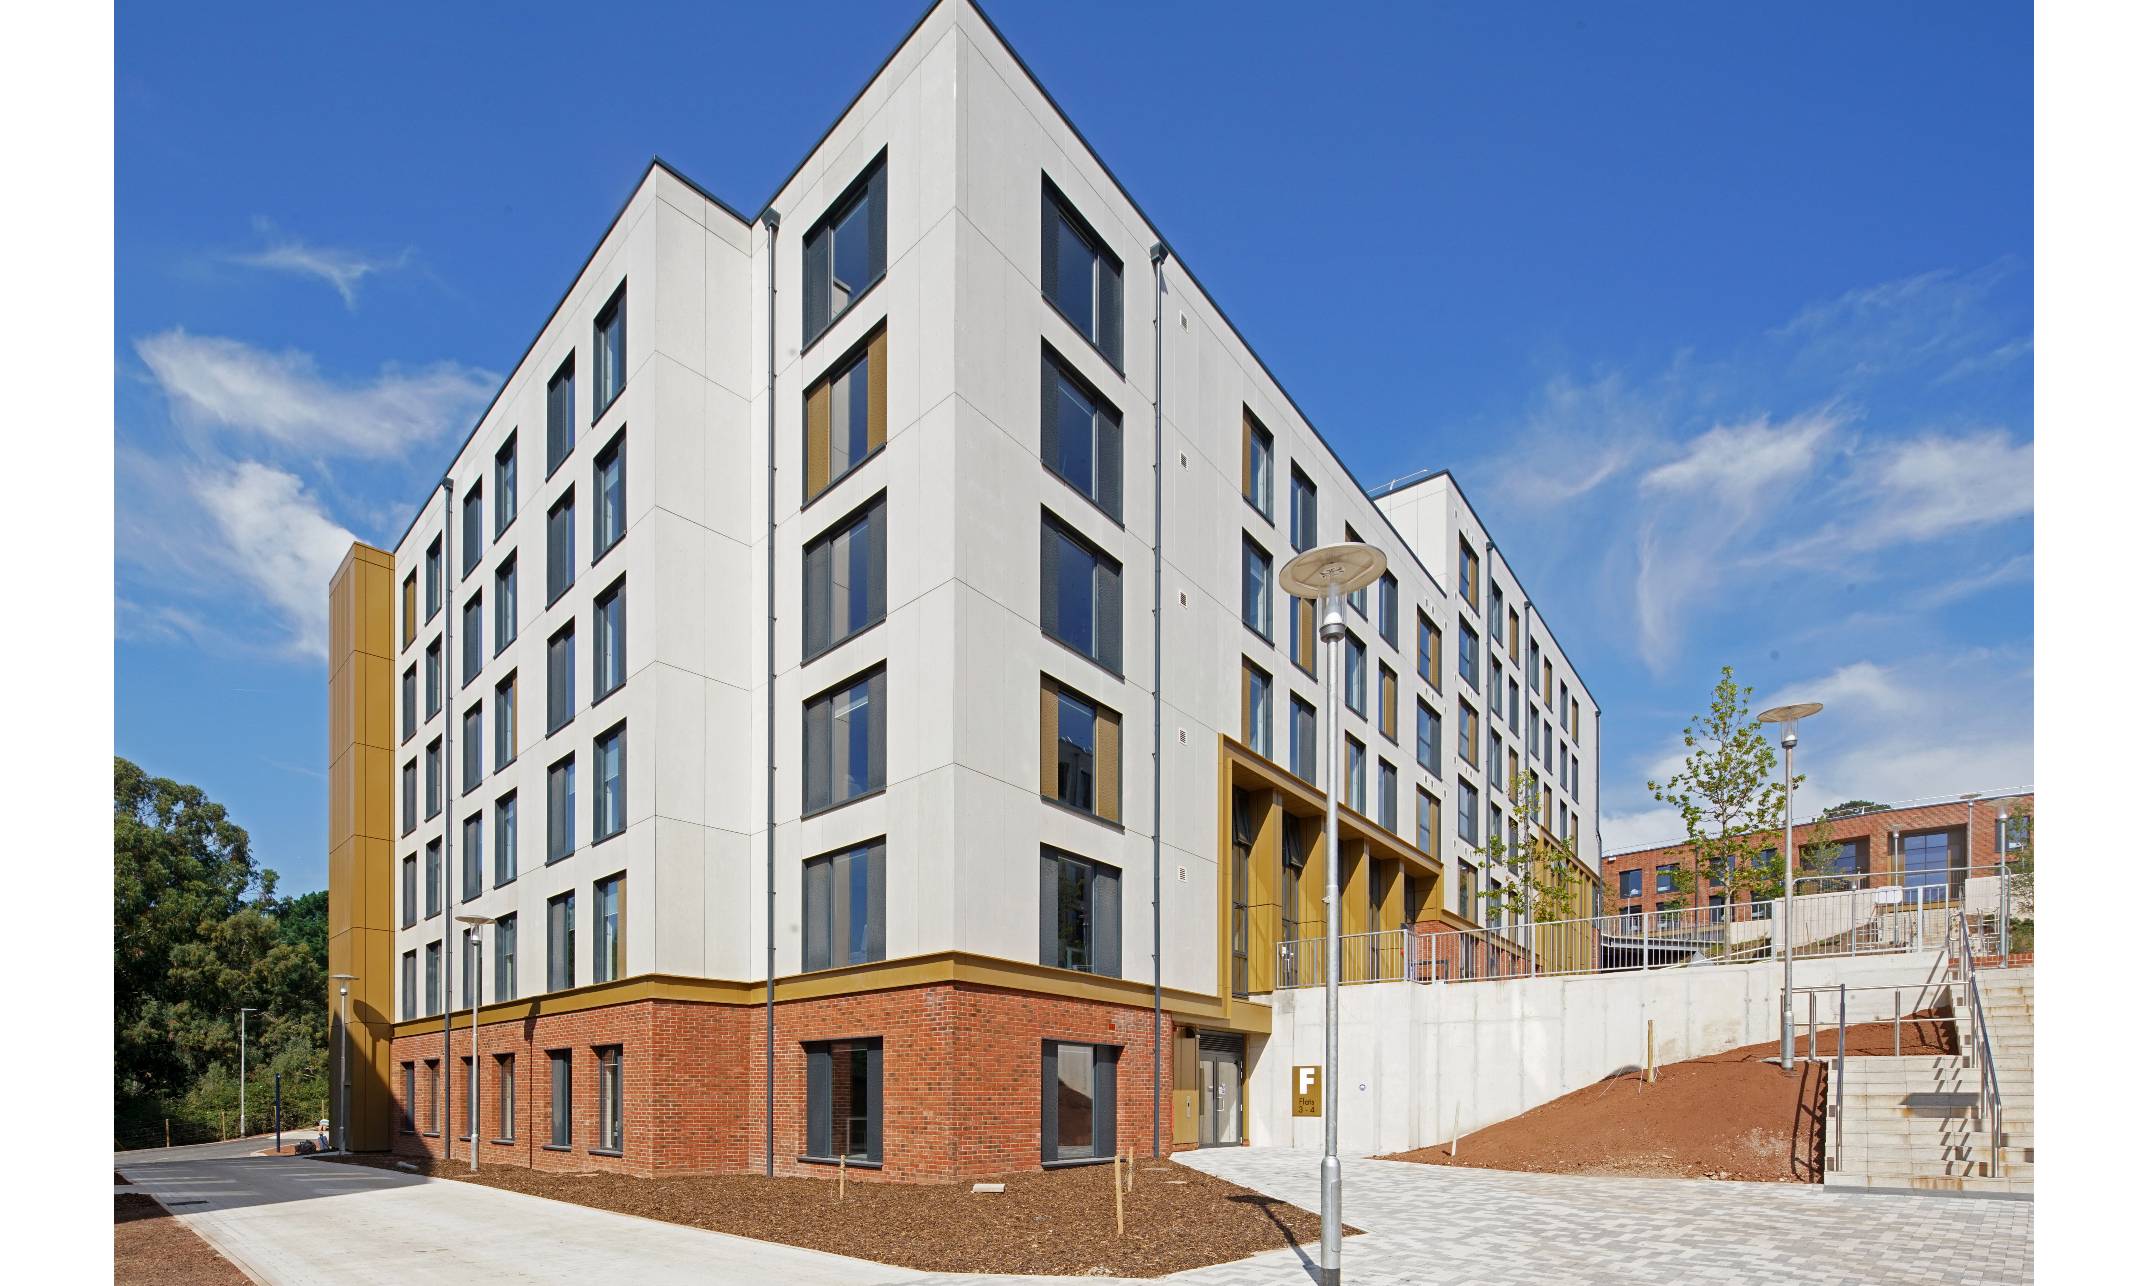 Students move into brand new UPP scheme at the University of Exeter